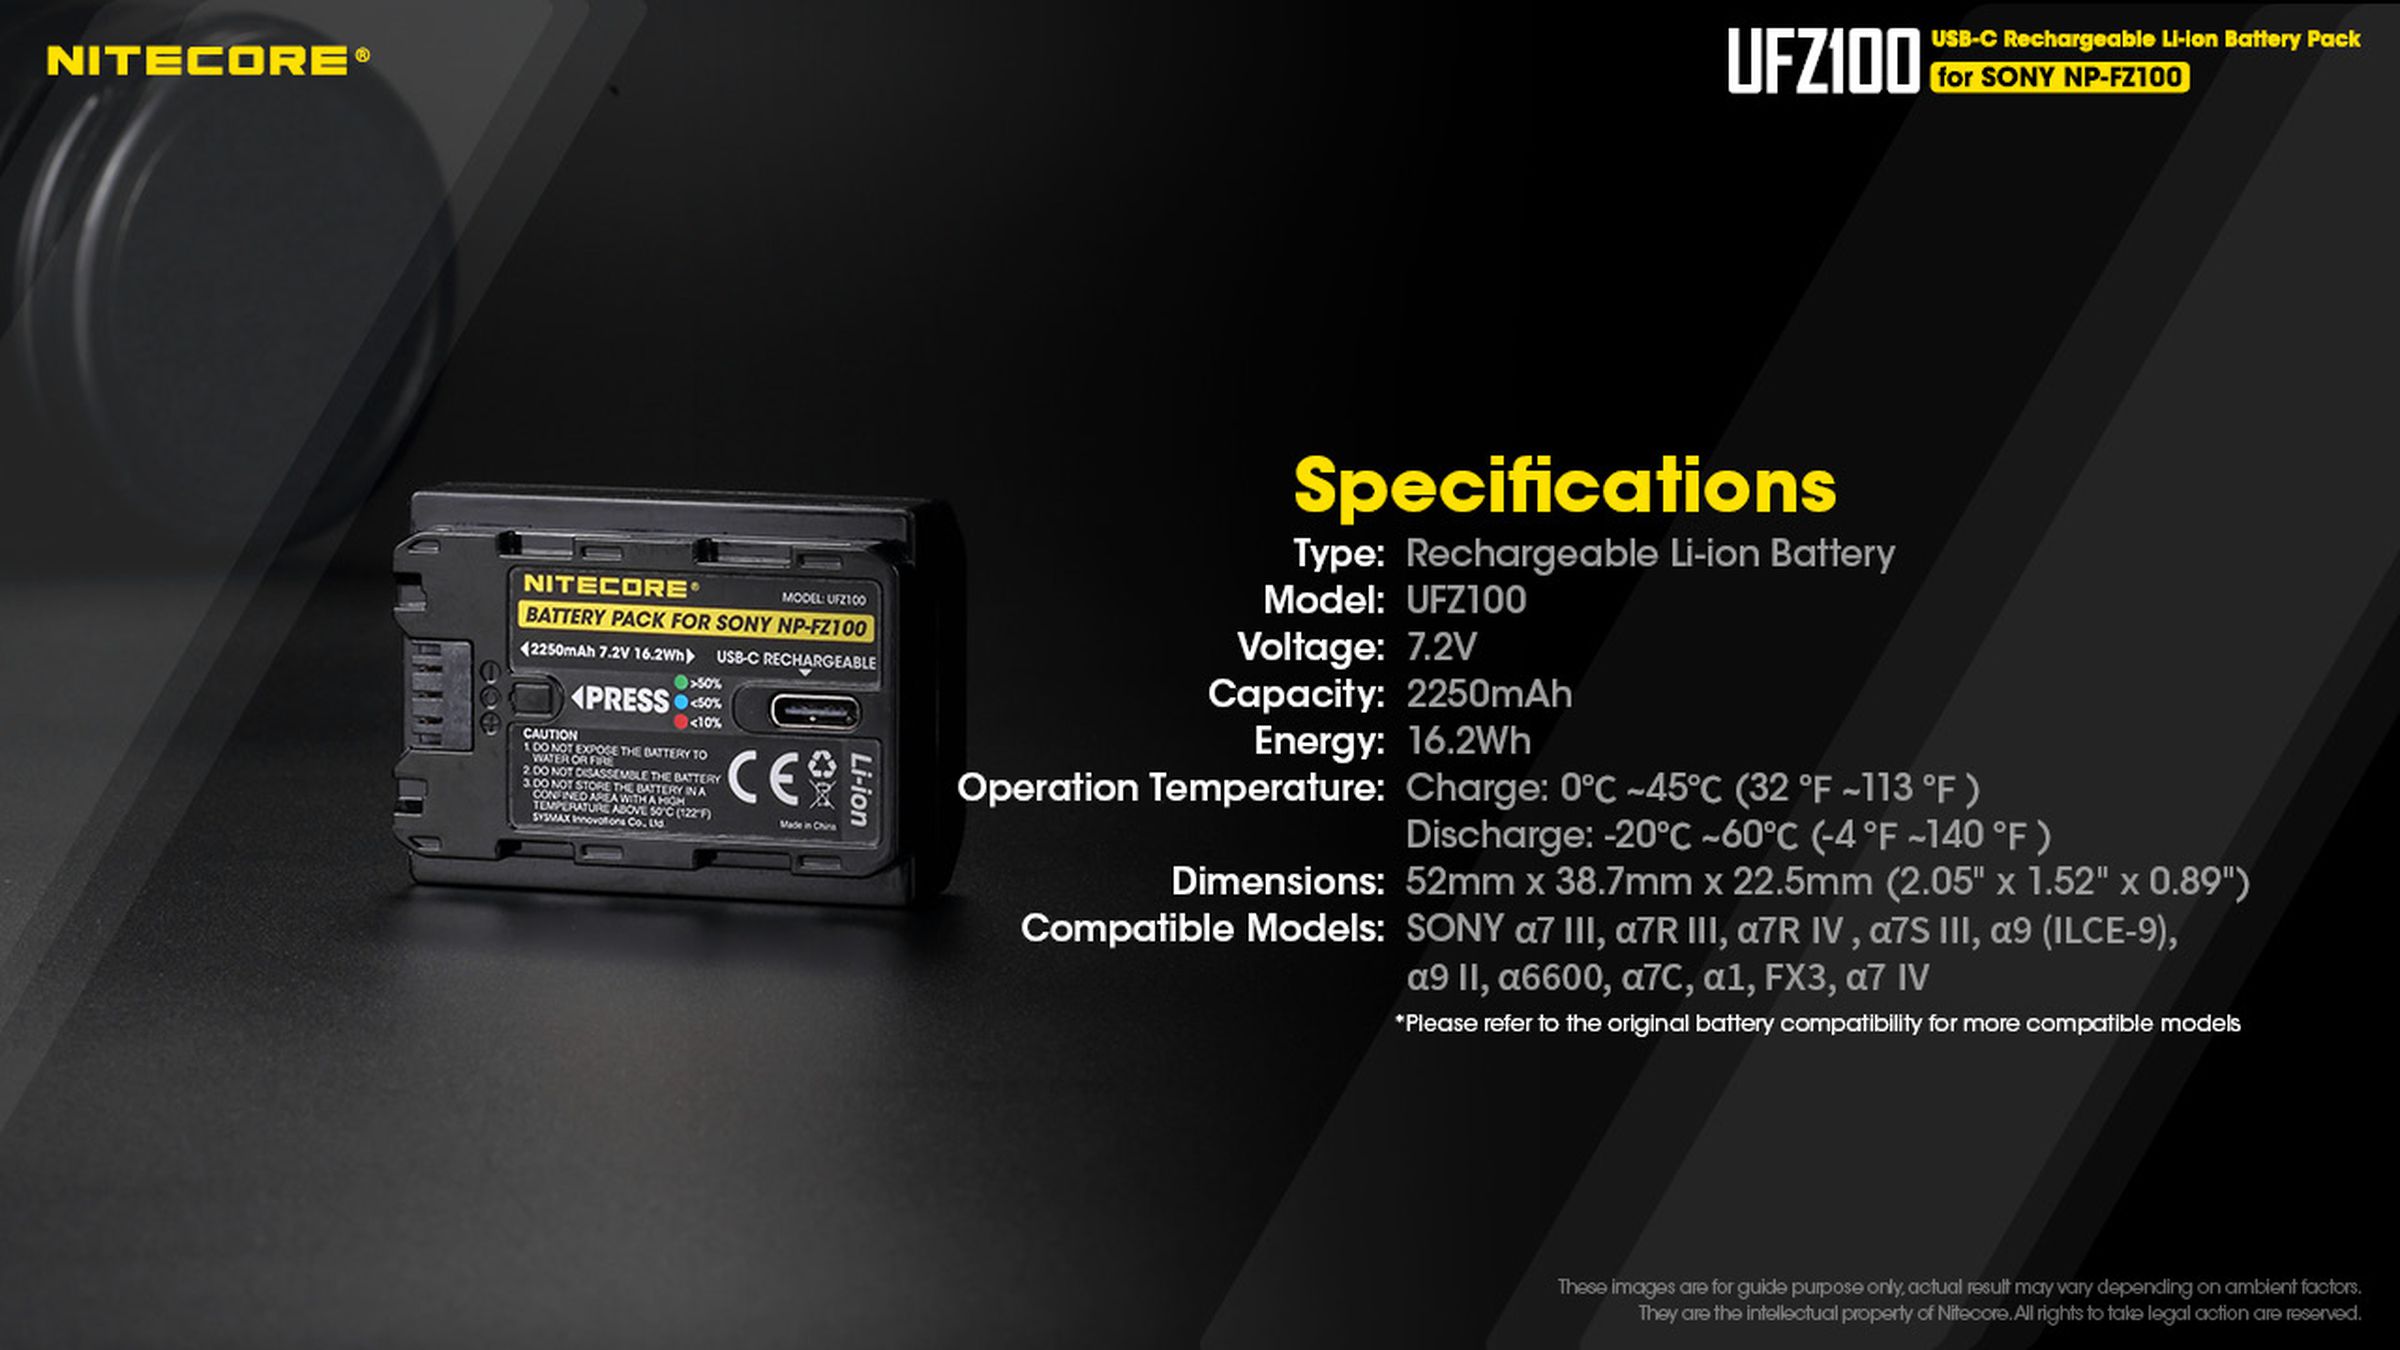 Nitecore’s UFZ100 battery fully charges in about four hours.